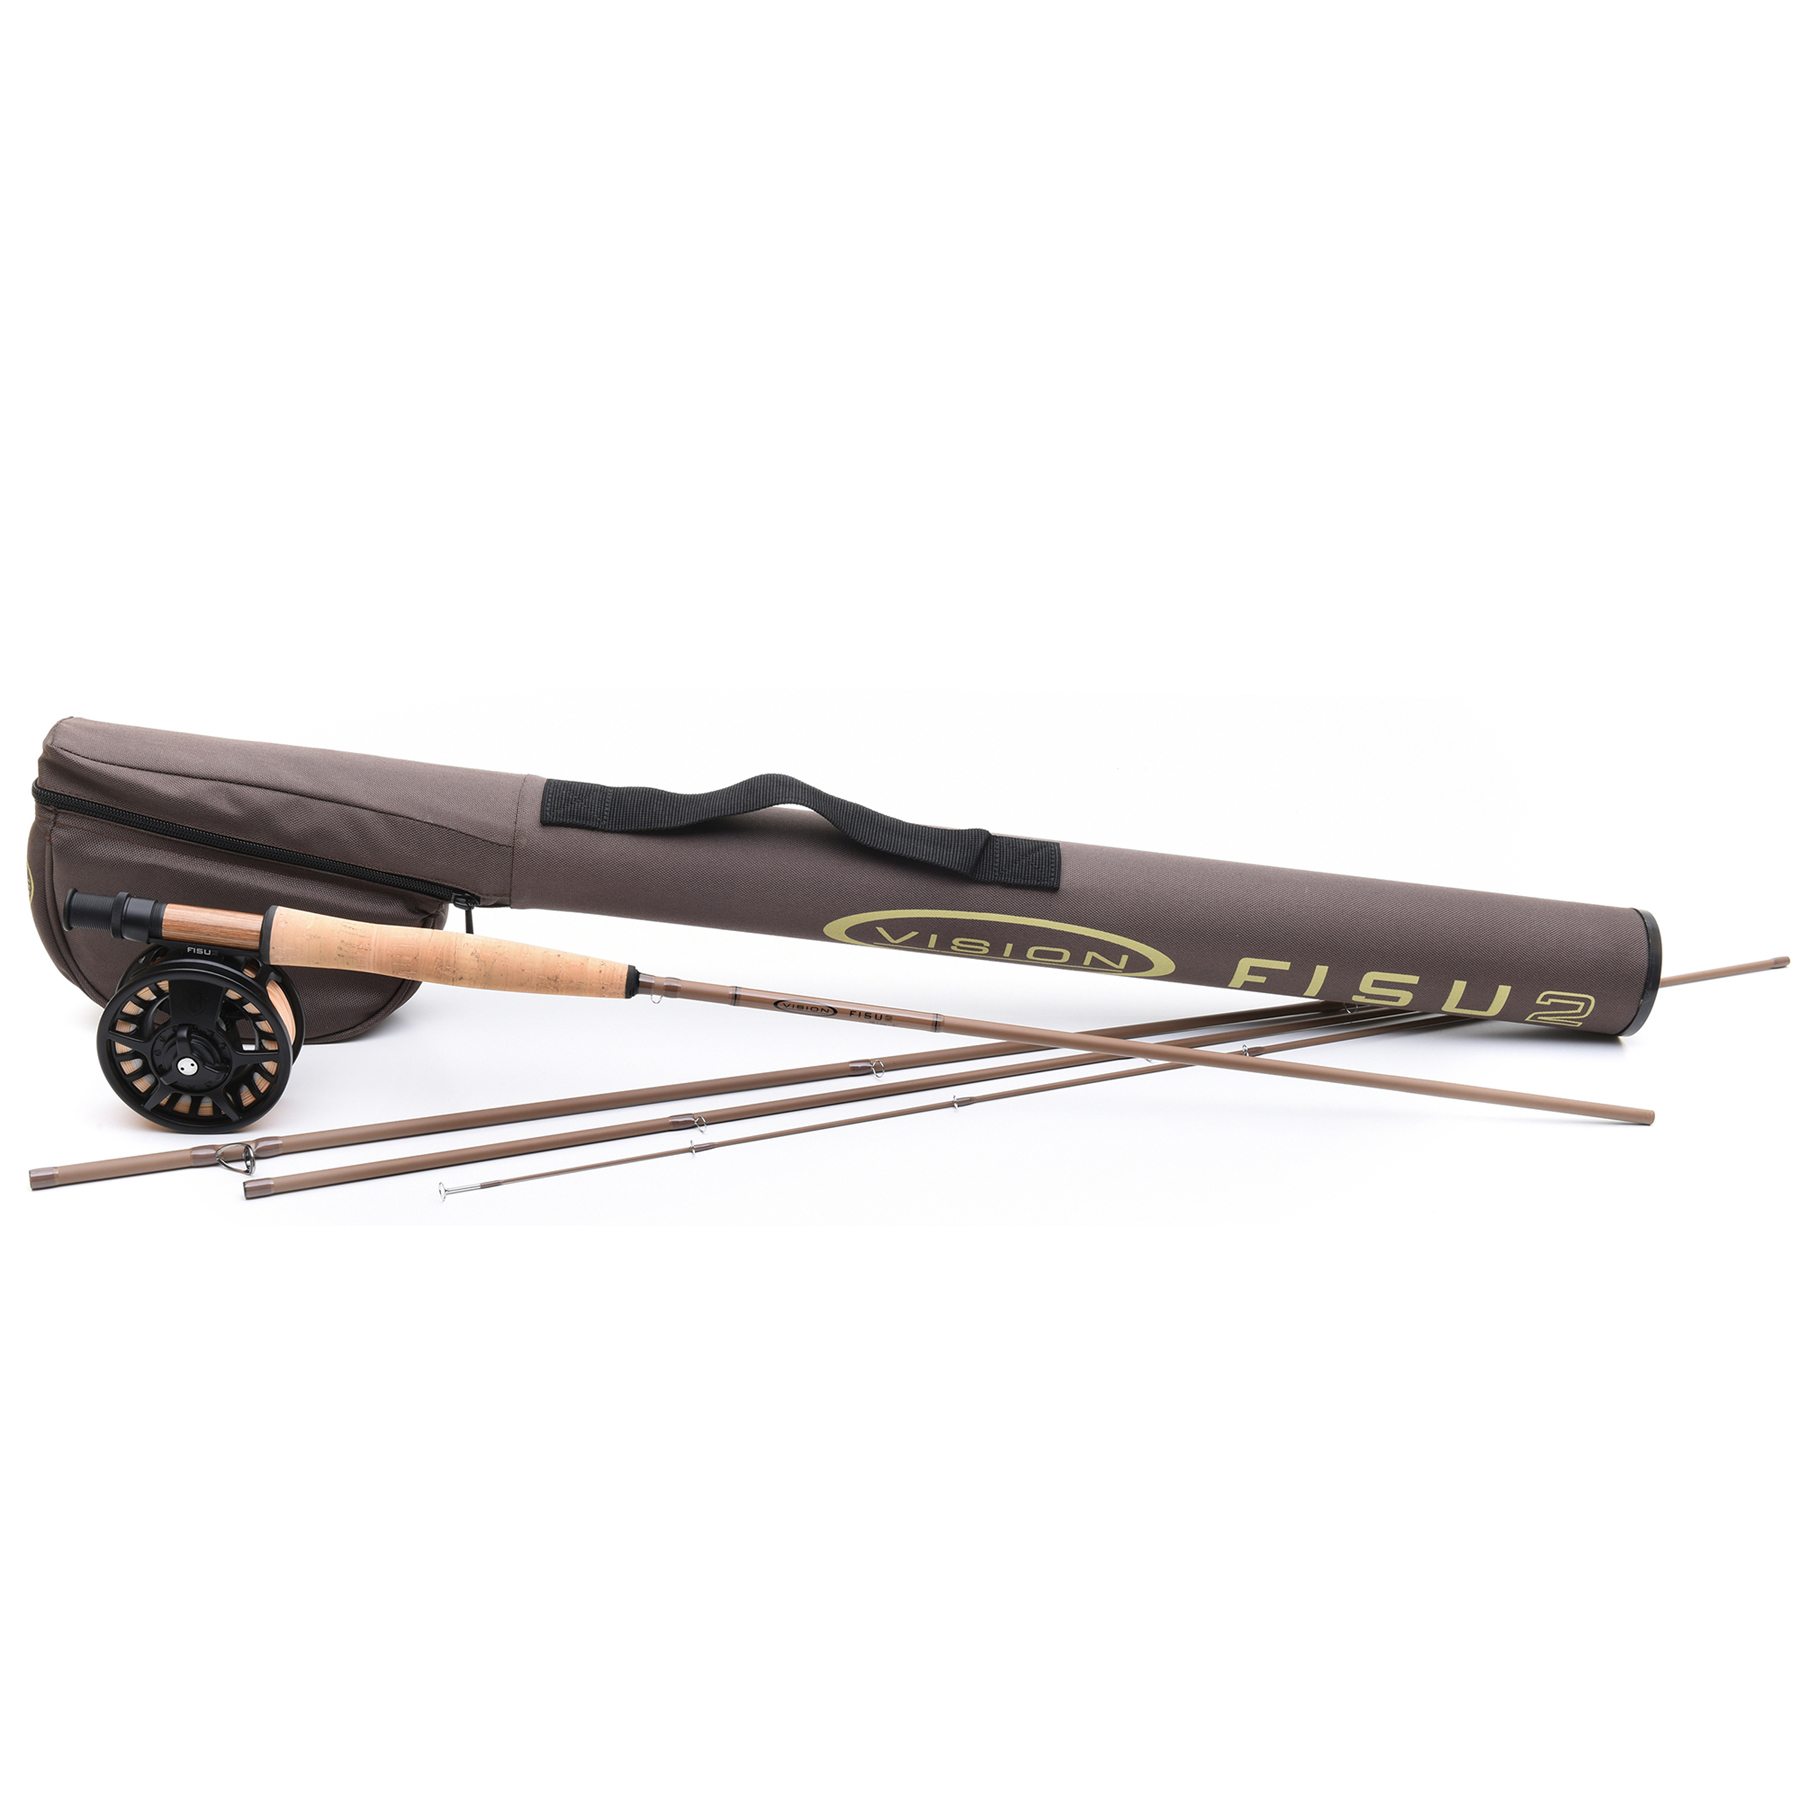 Vision Outfit Fisu 2 Fly Kit 8 Foot #4 For Fly Fishing (Length 8ft / 2.43m)